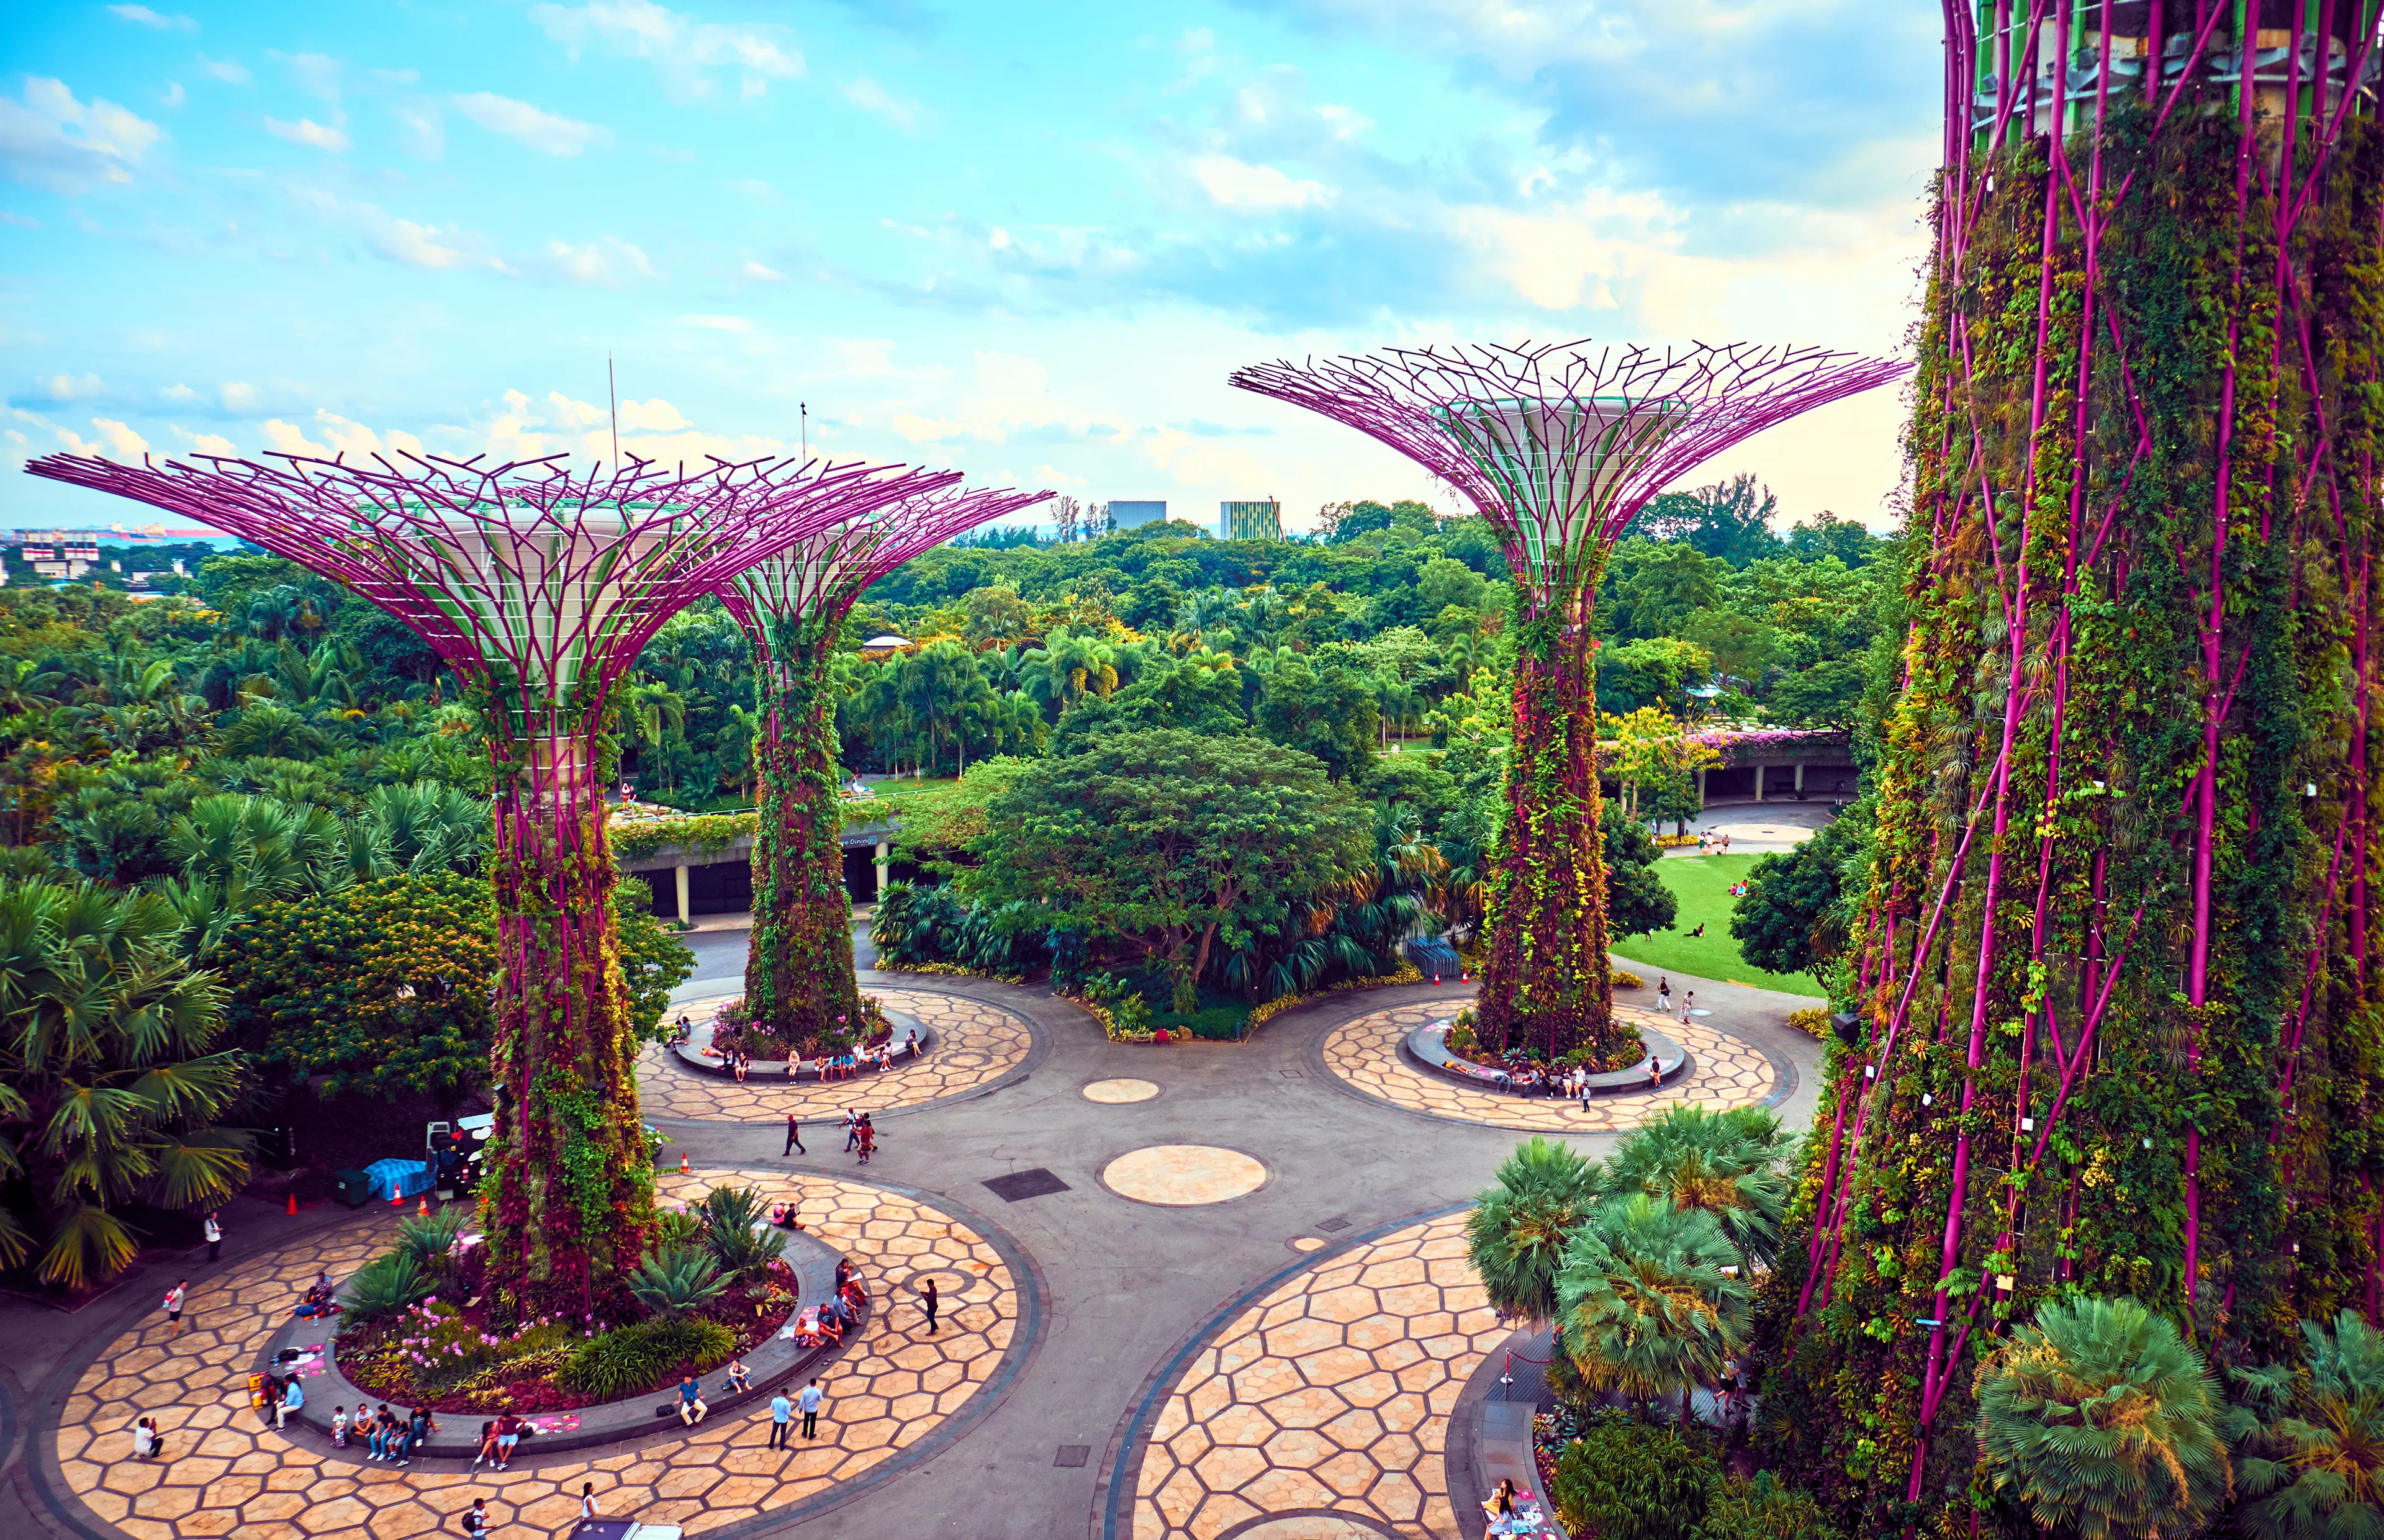 Explore Singapore: A 2-Day Itinerary Highlights